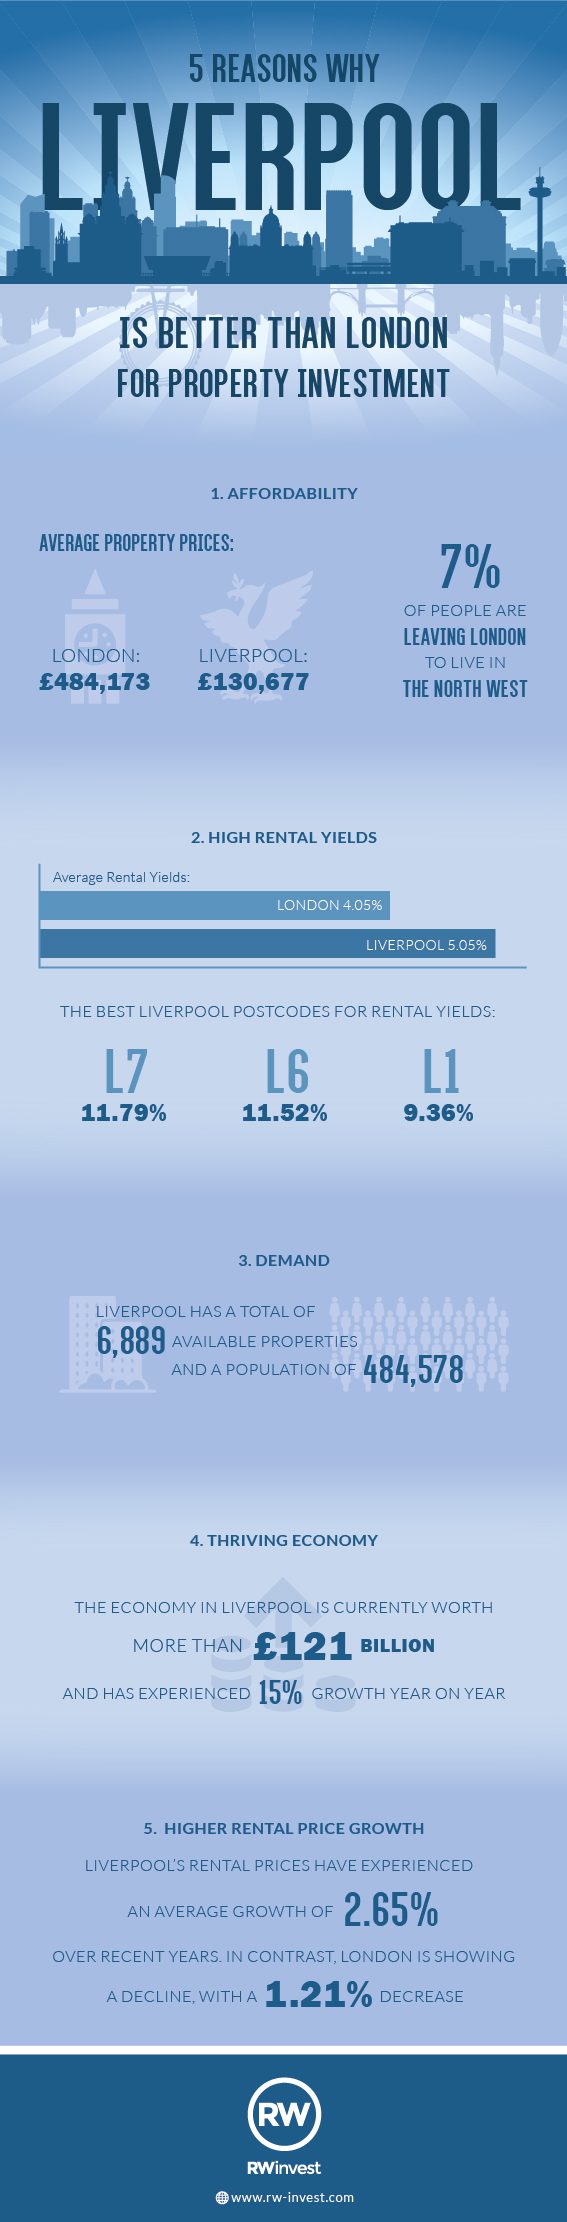 Property Investment in Liverpool Vs London infographic